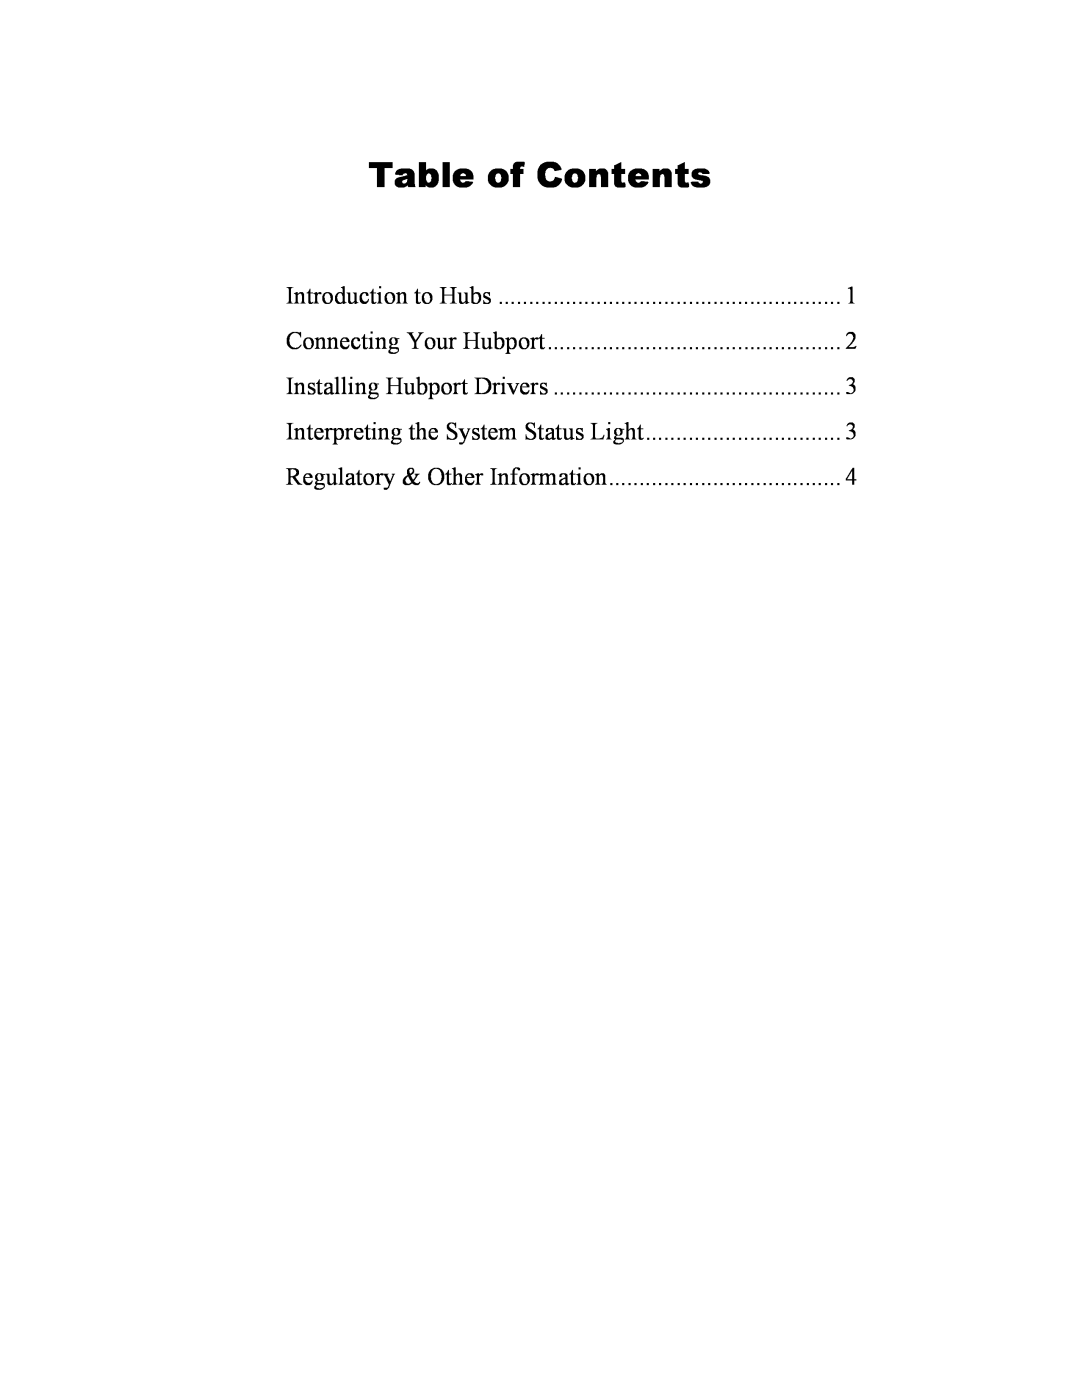 Digi Hubport/7 Table of Contents, Interpreting the System Status Light, Introduction to Hubs, Connecting Your Hubport 